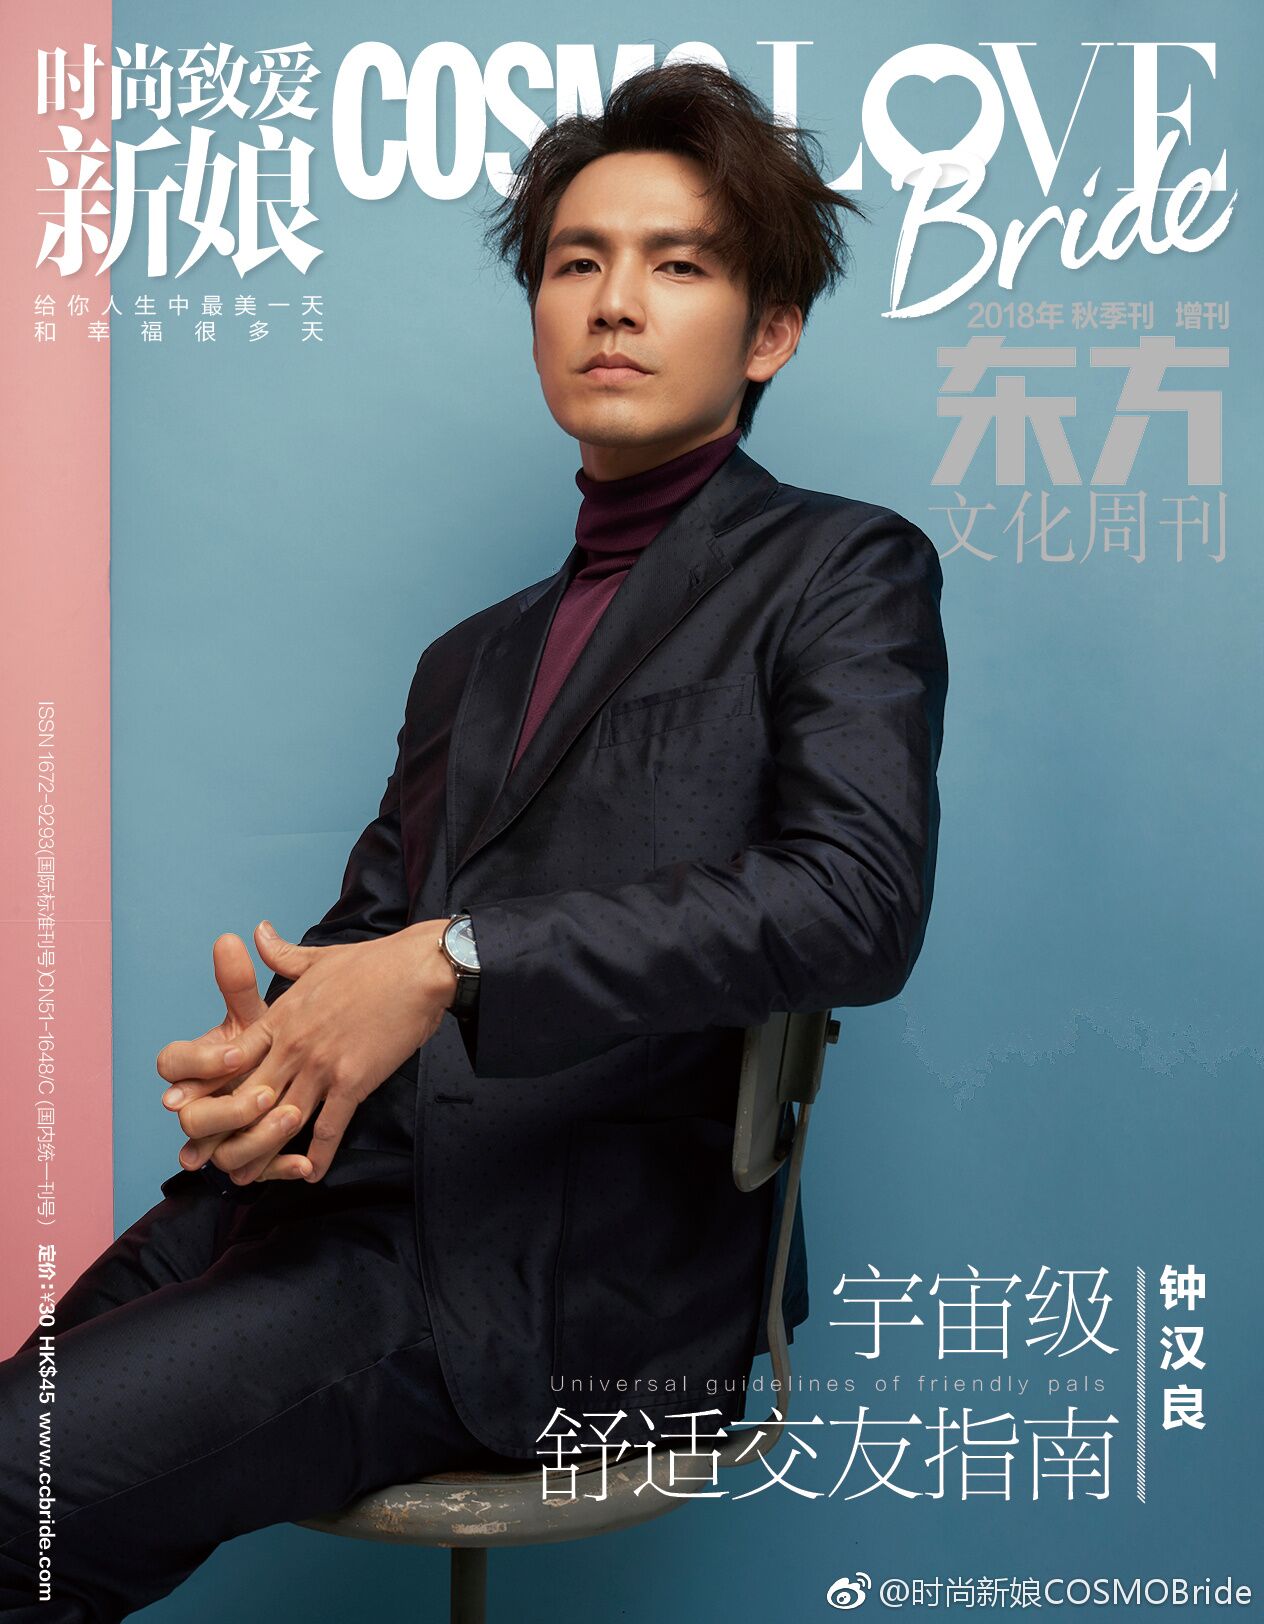 Wallace Chung Magazine Cover